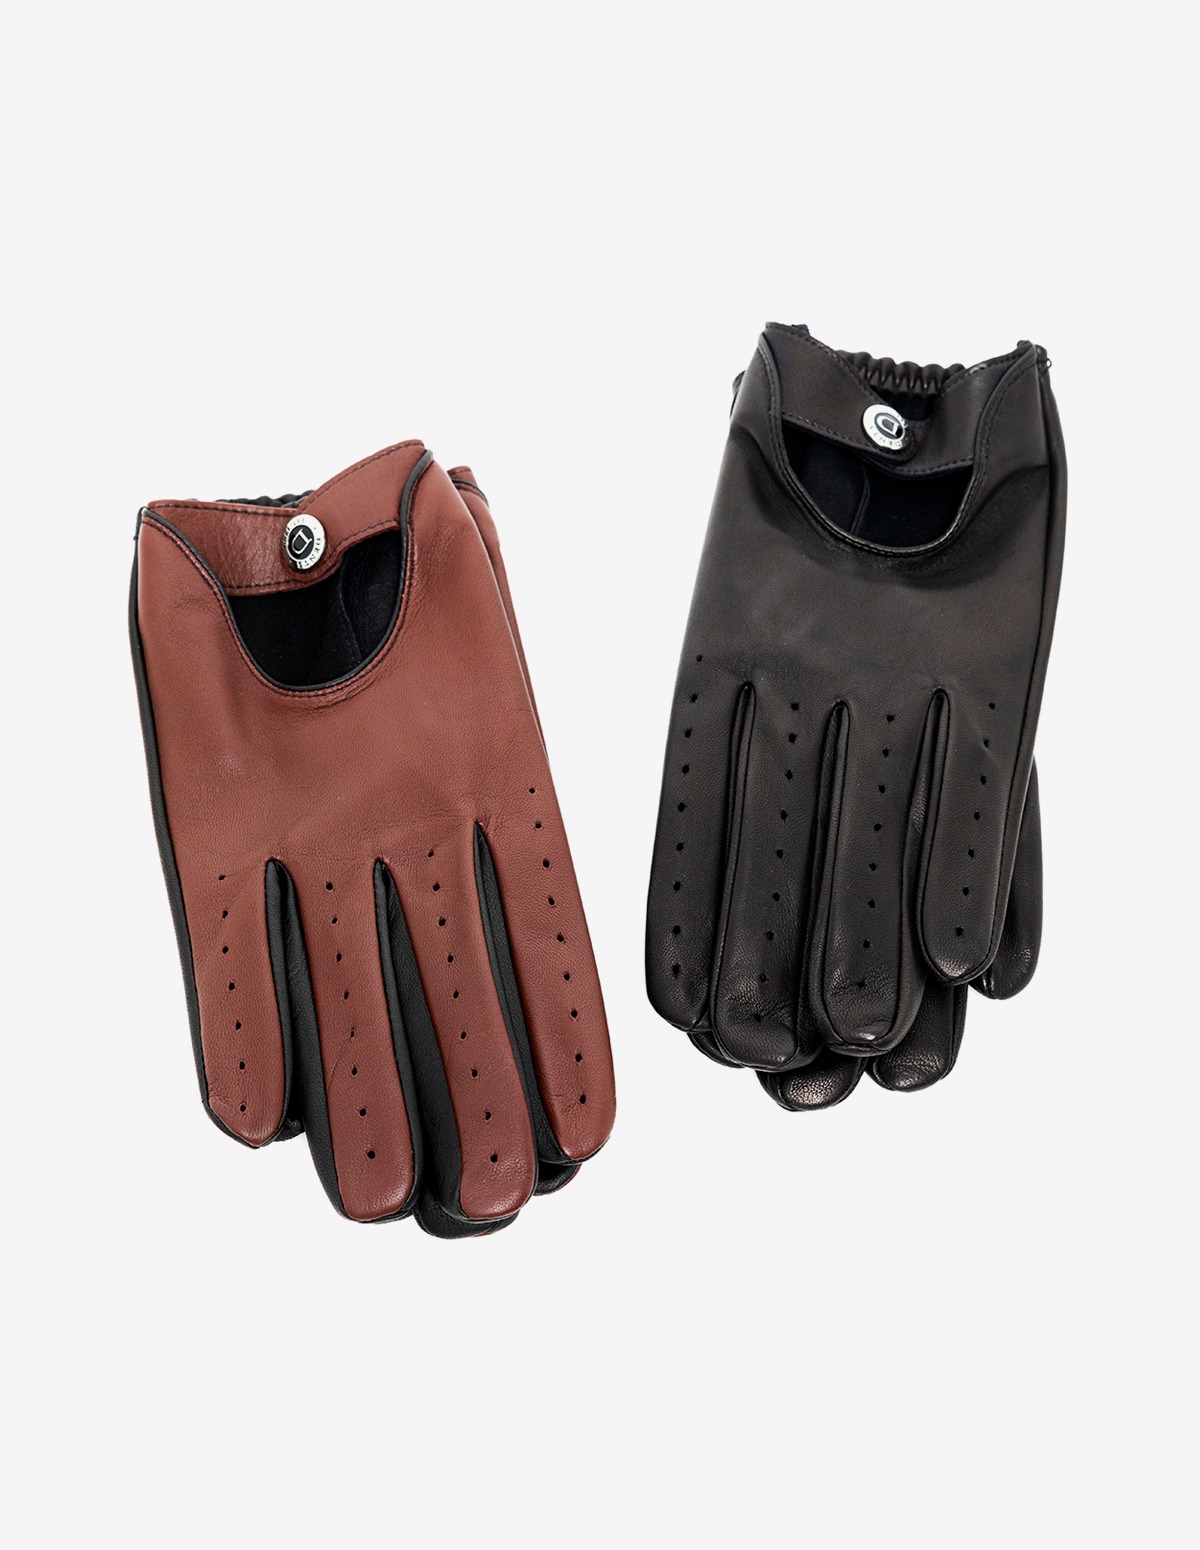 Woburn Hairsheep Leather Driving Gloves